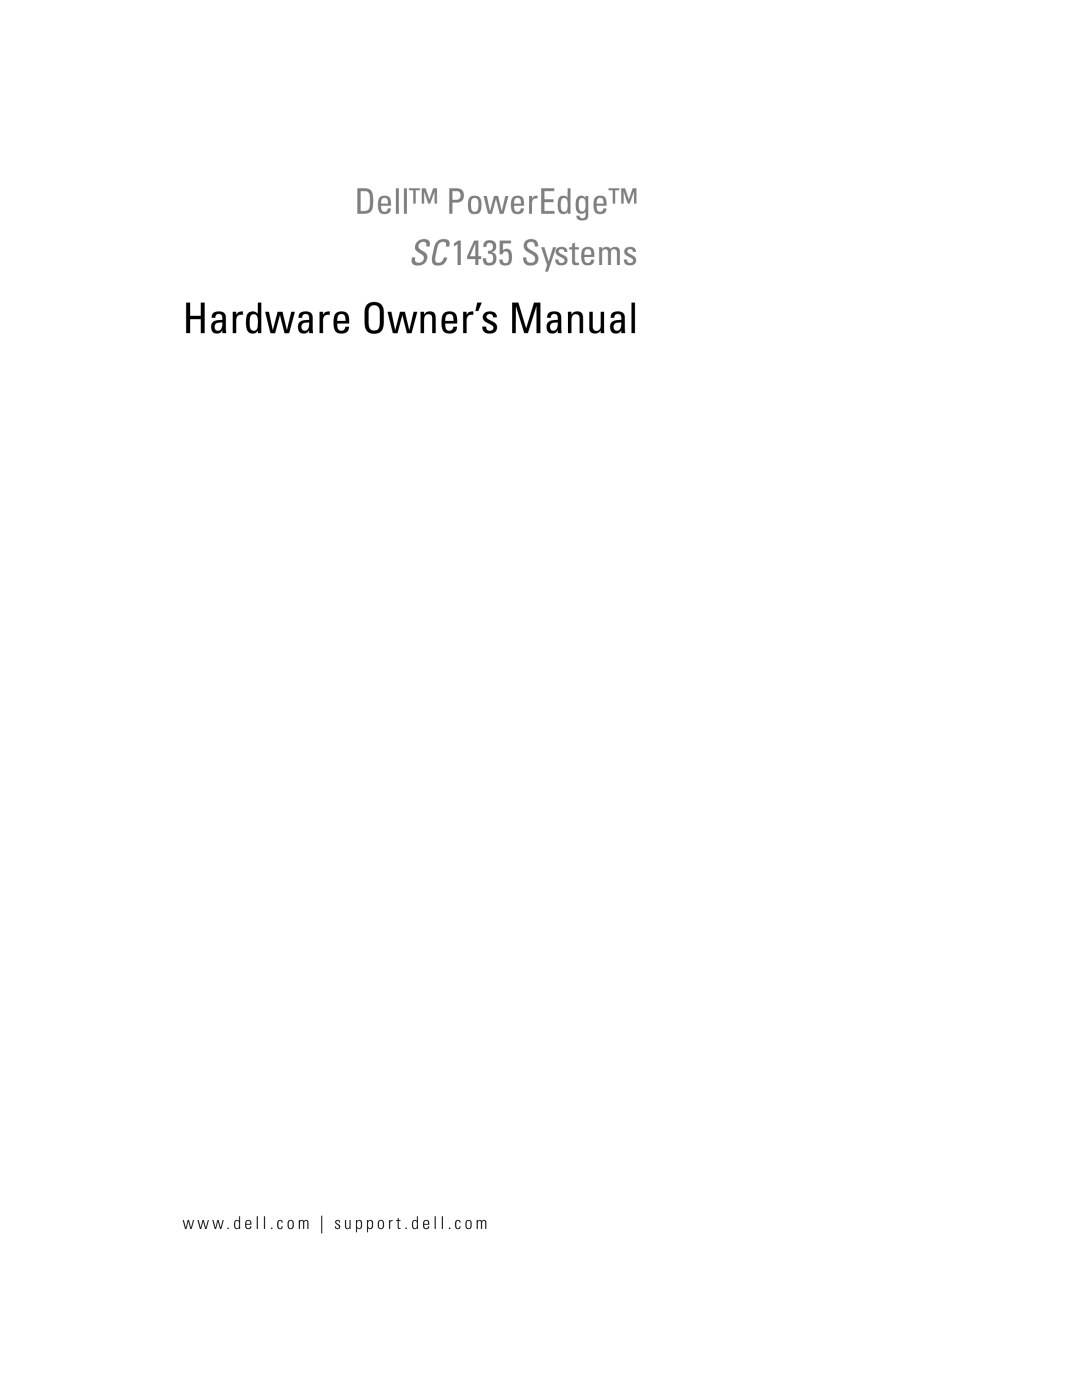 Dell owner manual Dell PowerEdge SC1435 Systems, W . d e l l . c o m s u p p o r t . d e l l . c o m 